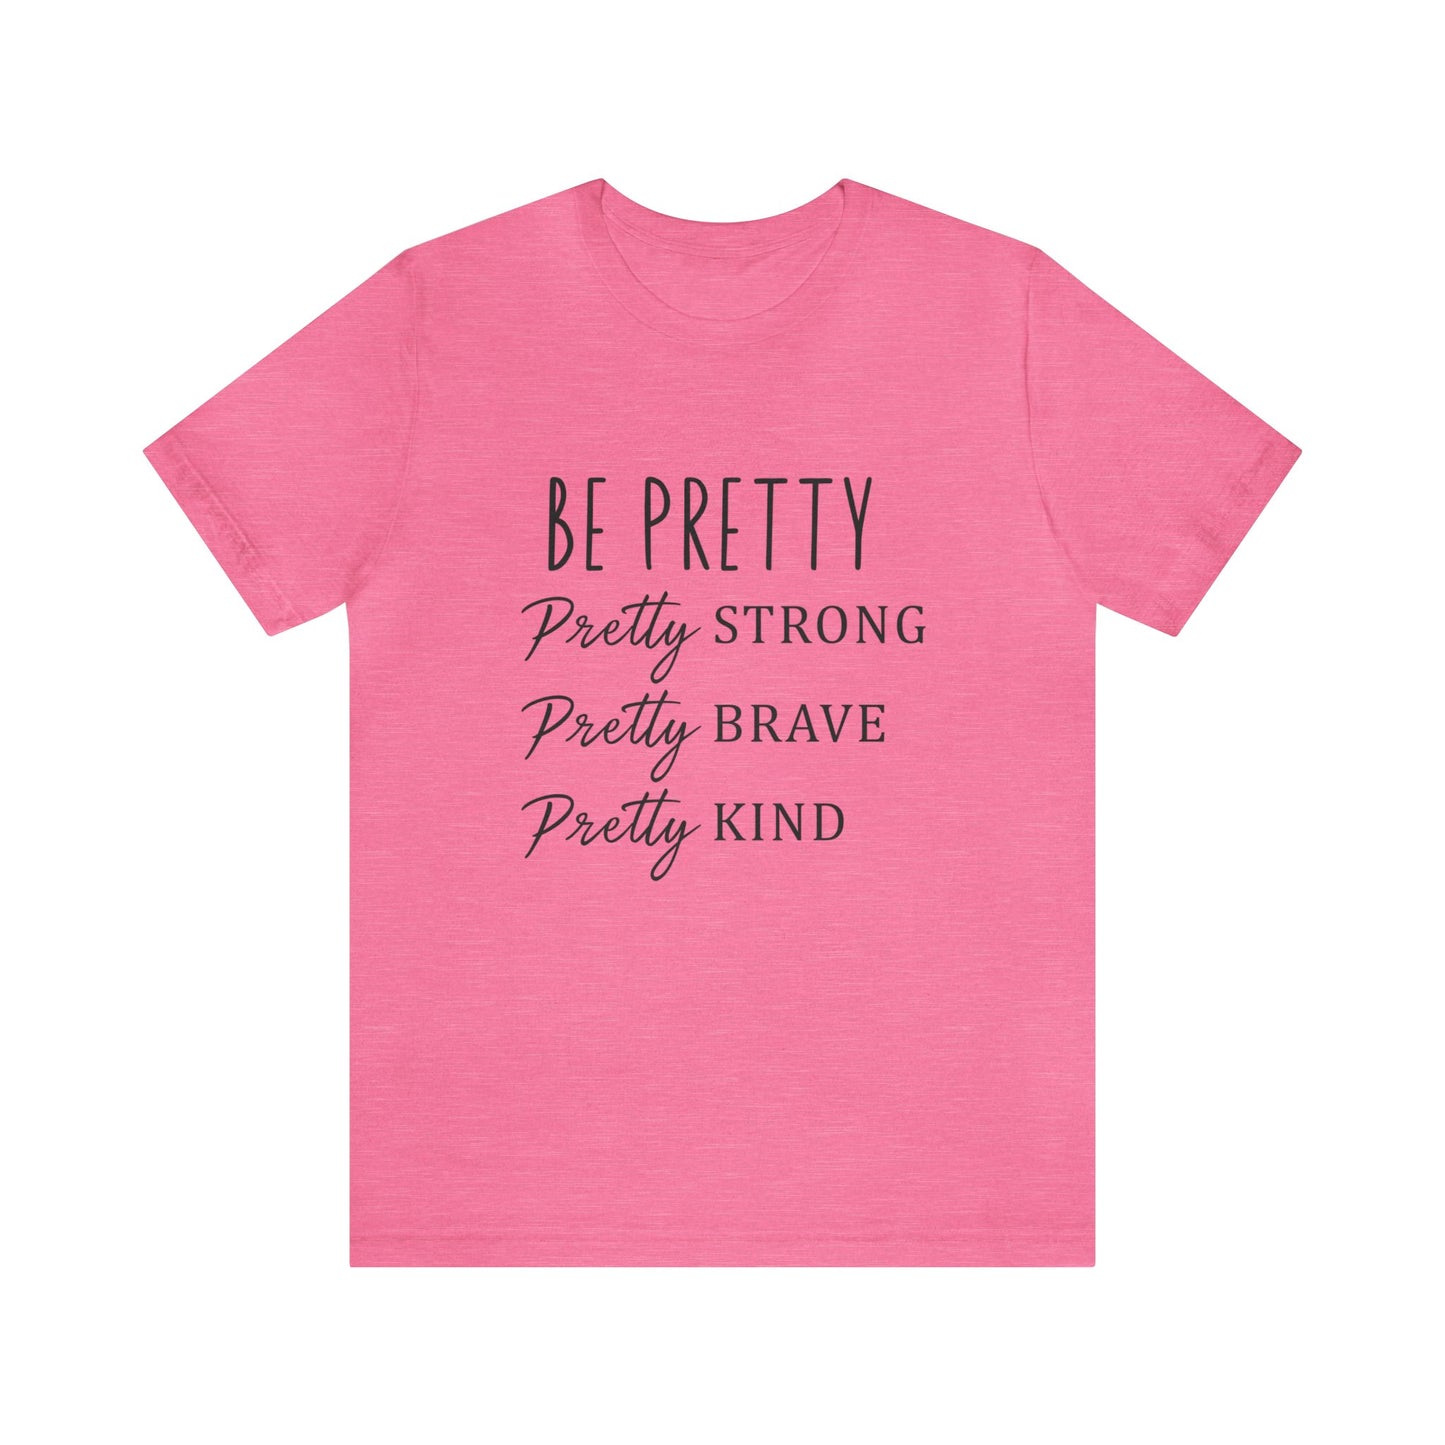 Be Pretty Strong Brave Kind Women's Tshirt